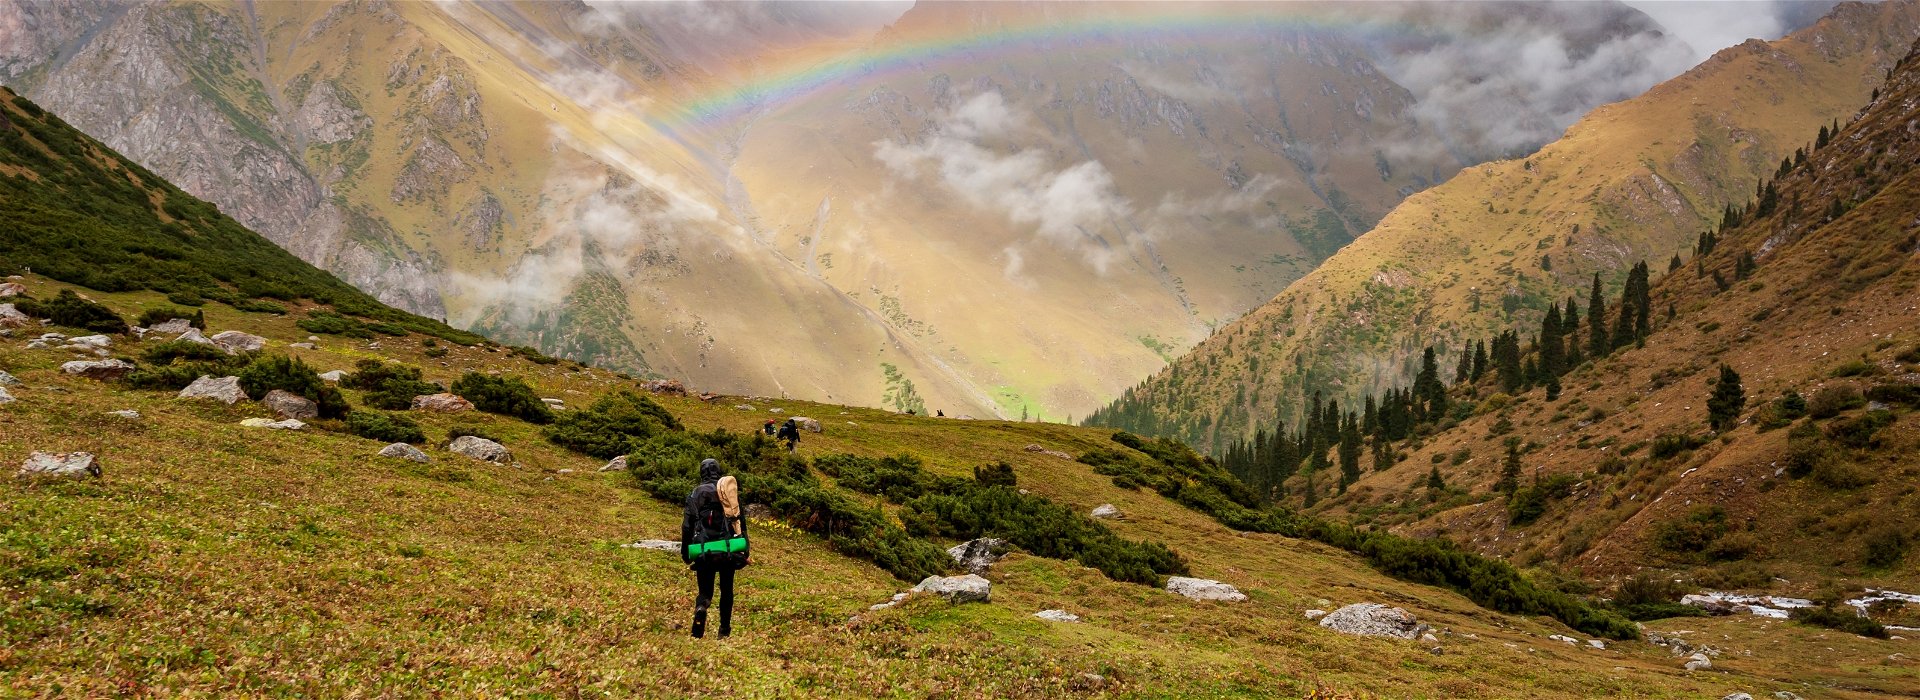 9 reasons to trek in Kyrgyzstan and Central Asia